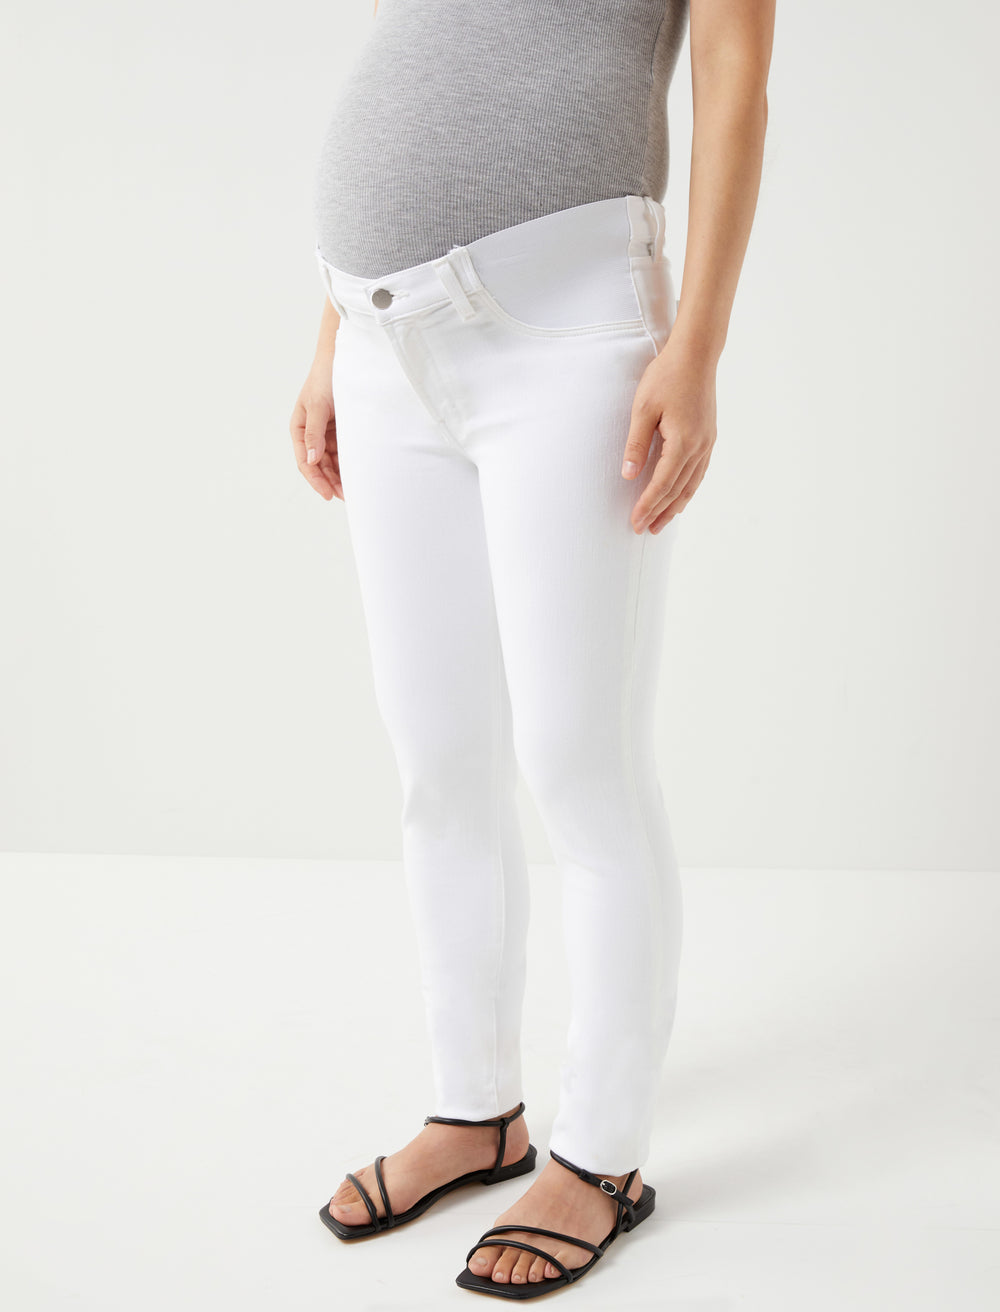 J Brand Side Panel Mama J Super Skinny Maternity Jeans - A Pea In the Pod